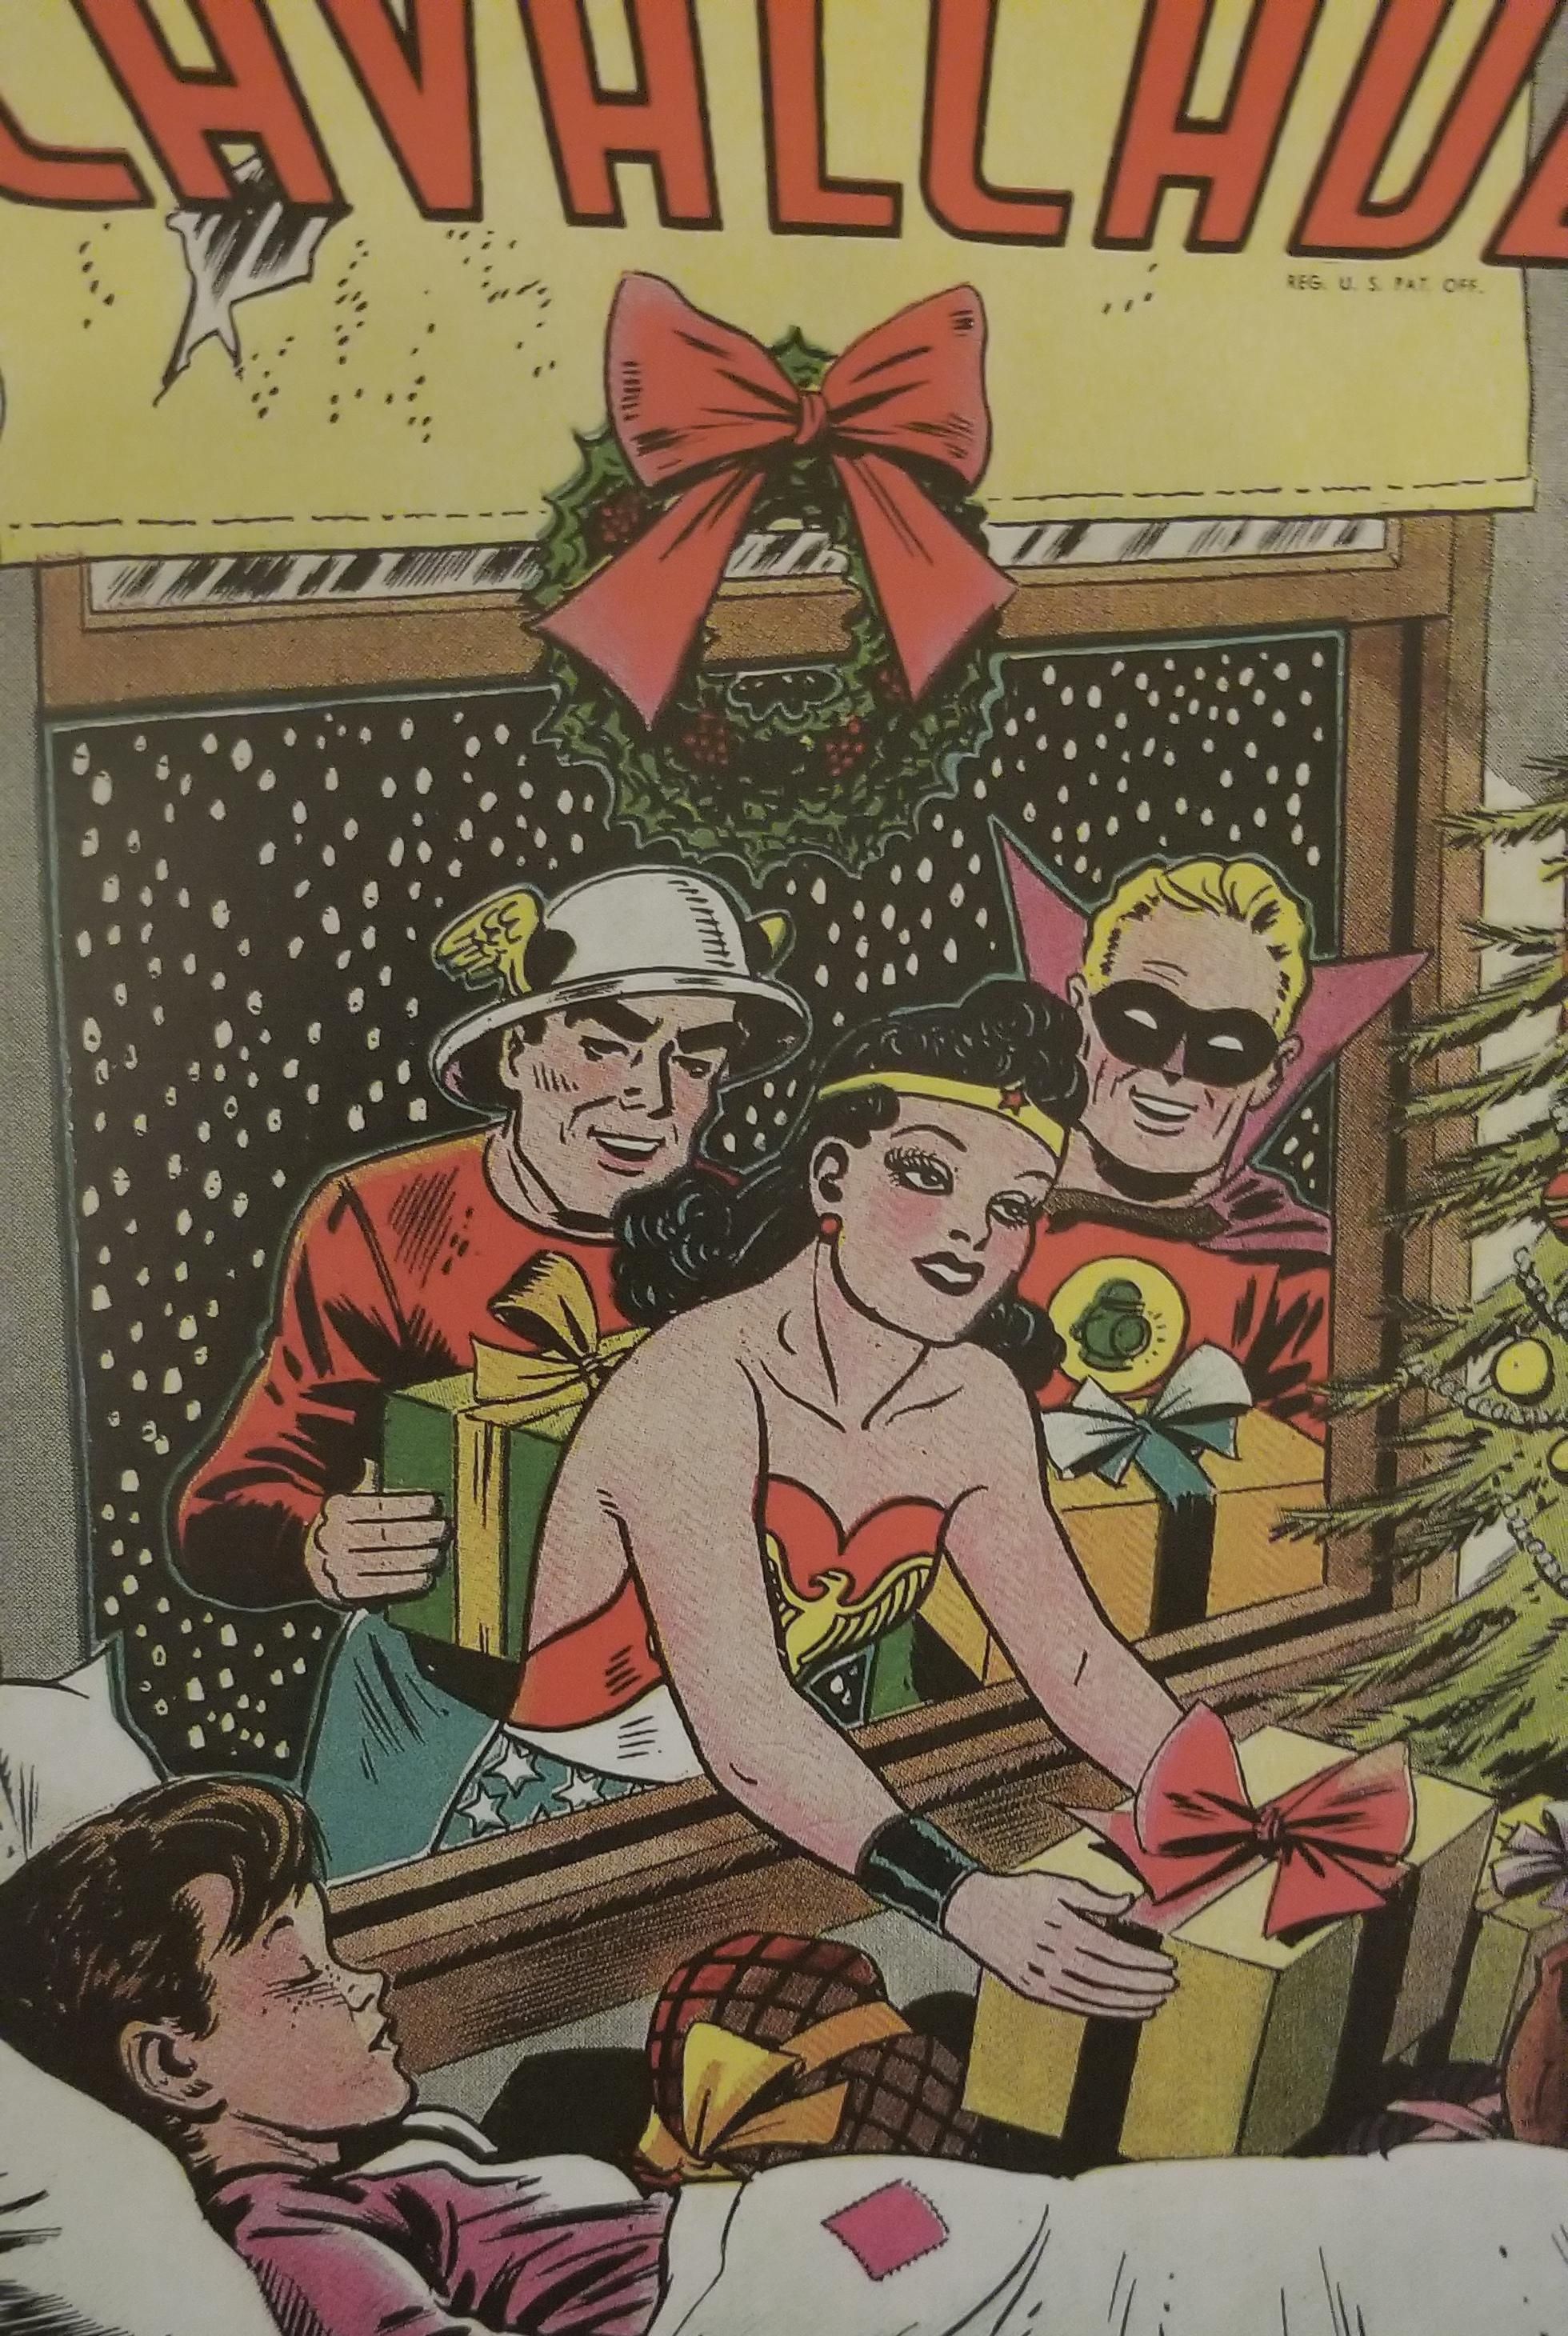 Is it just me or does Wonder Woman look like she is stoned and stealing presents from this kid?